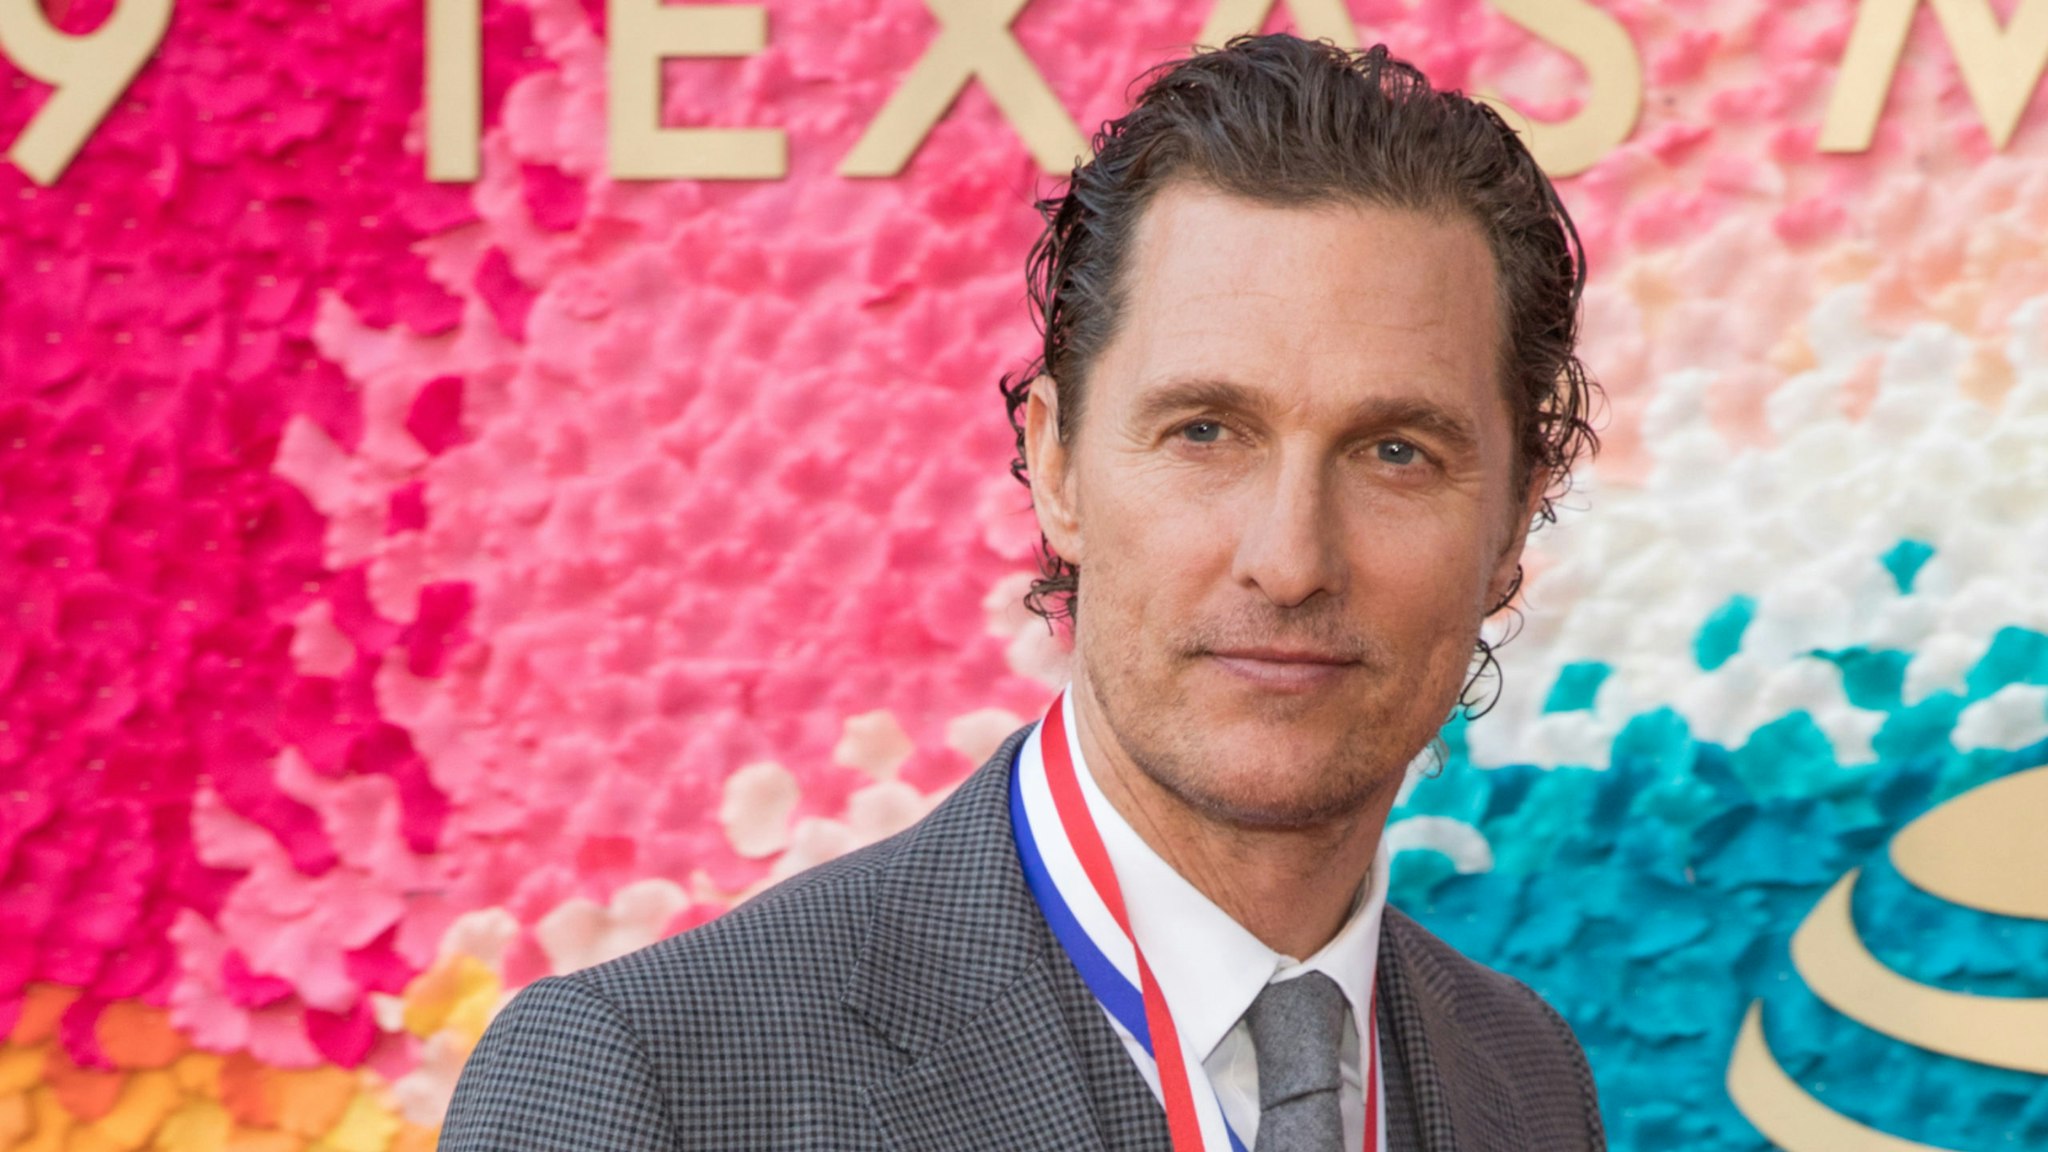 Honoree Matthew McConaughey attends the 2019 Texas Medal Of Arts Awards at the Long Center for the Performing Arts on February 27, 2019 in Austin, Texas.